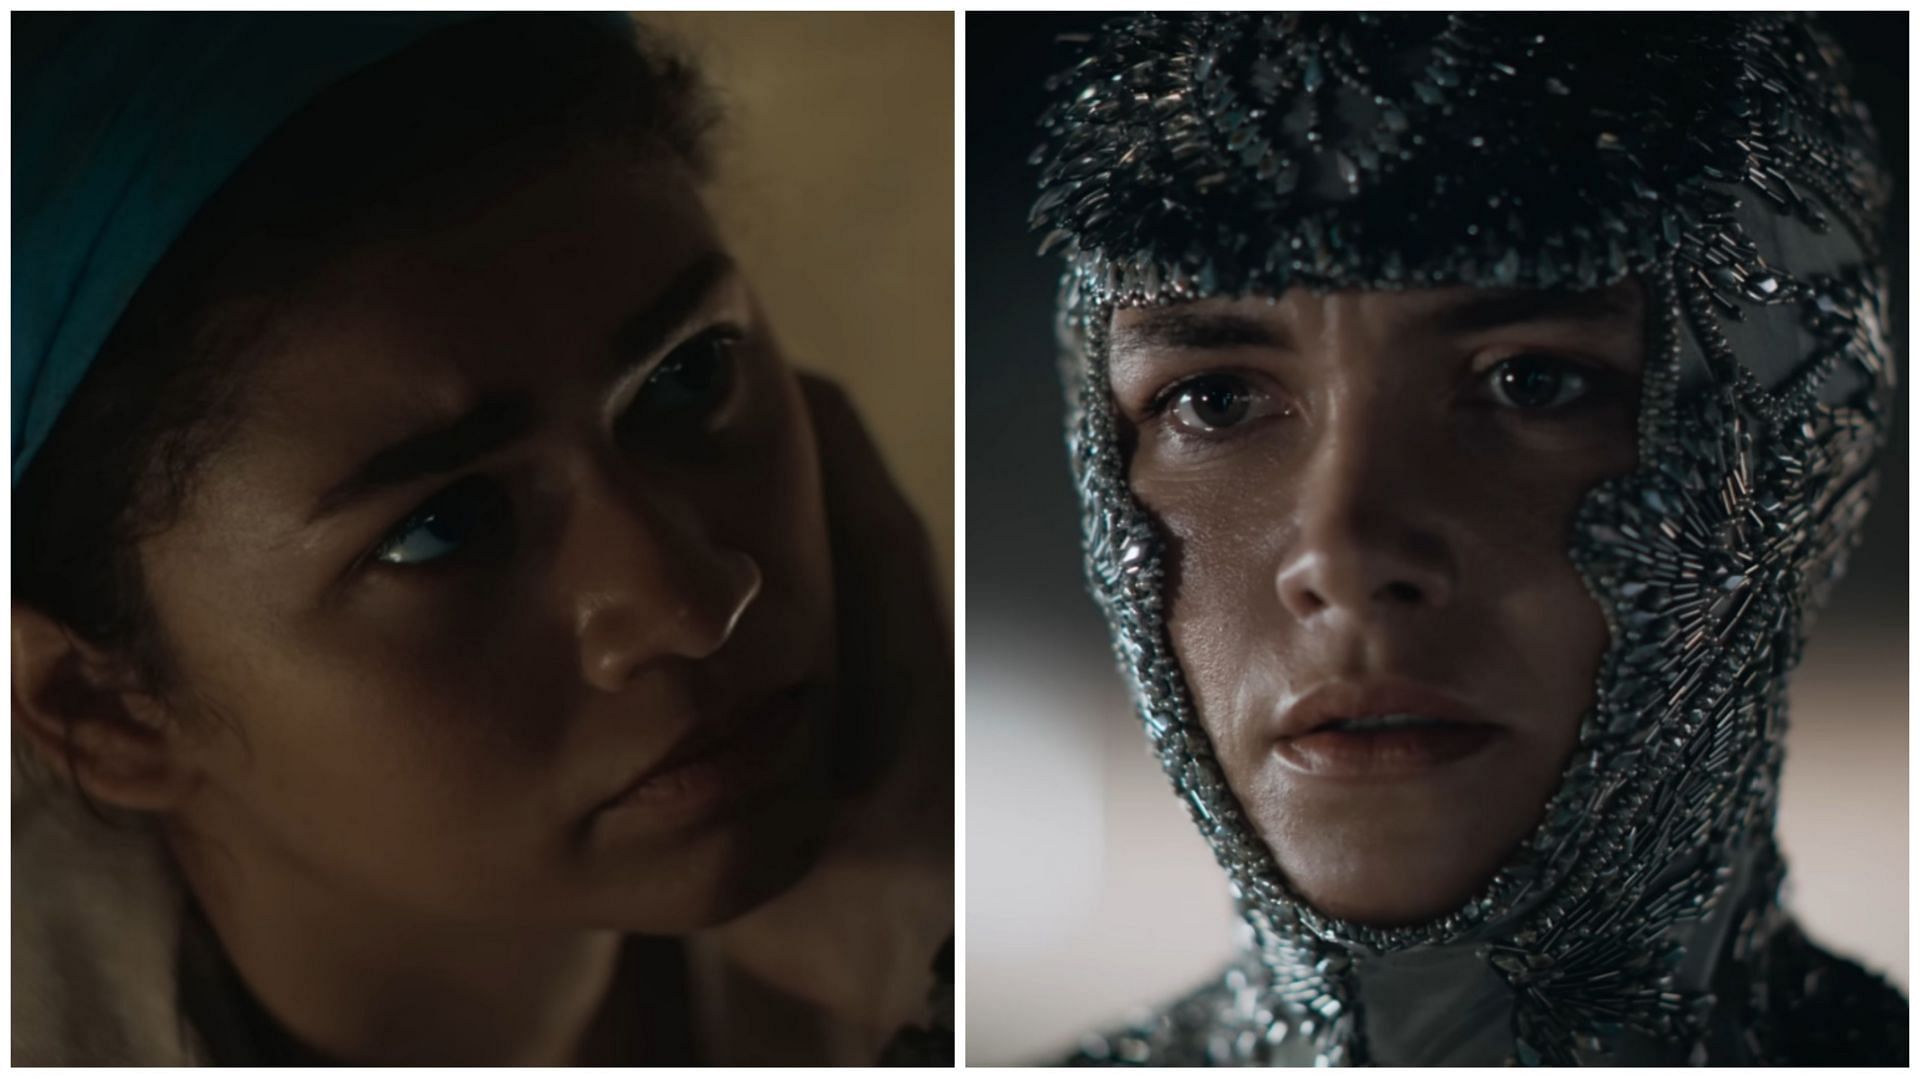 Chani and Irulan in Dune: Part Two (Images via Warner Bros. Pictures, Dune: Part Two Trailer 3, 01:43 and 01:52)